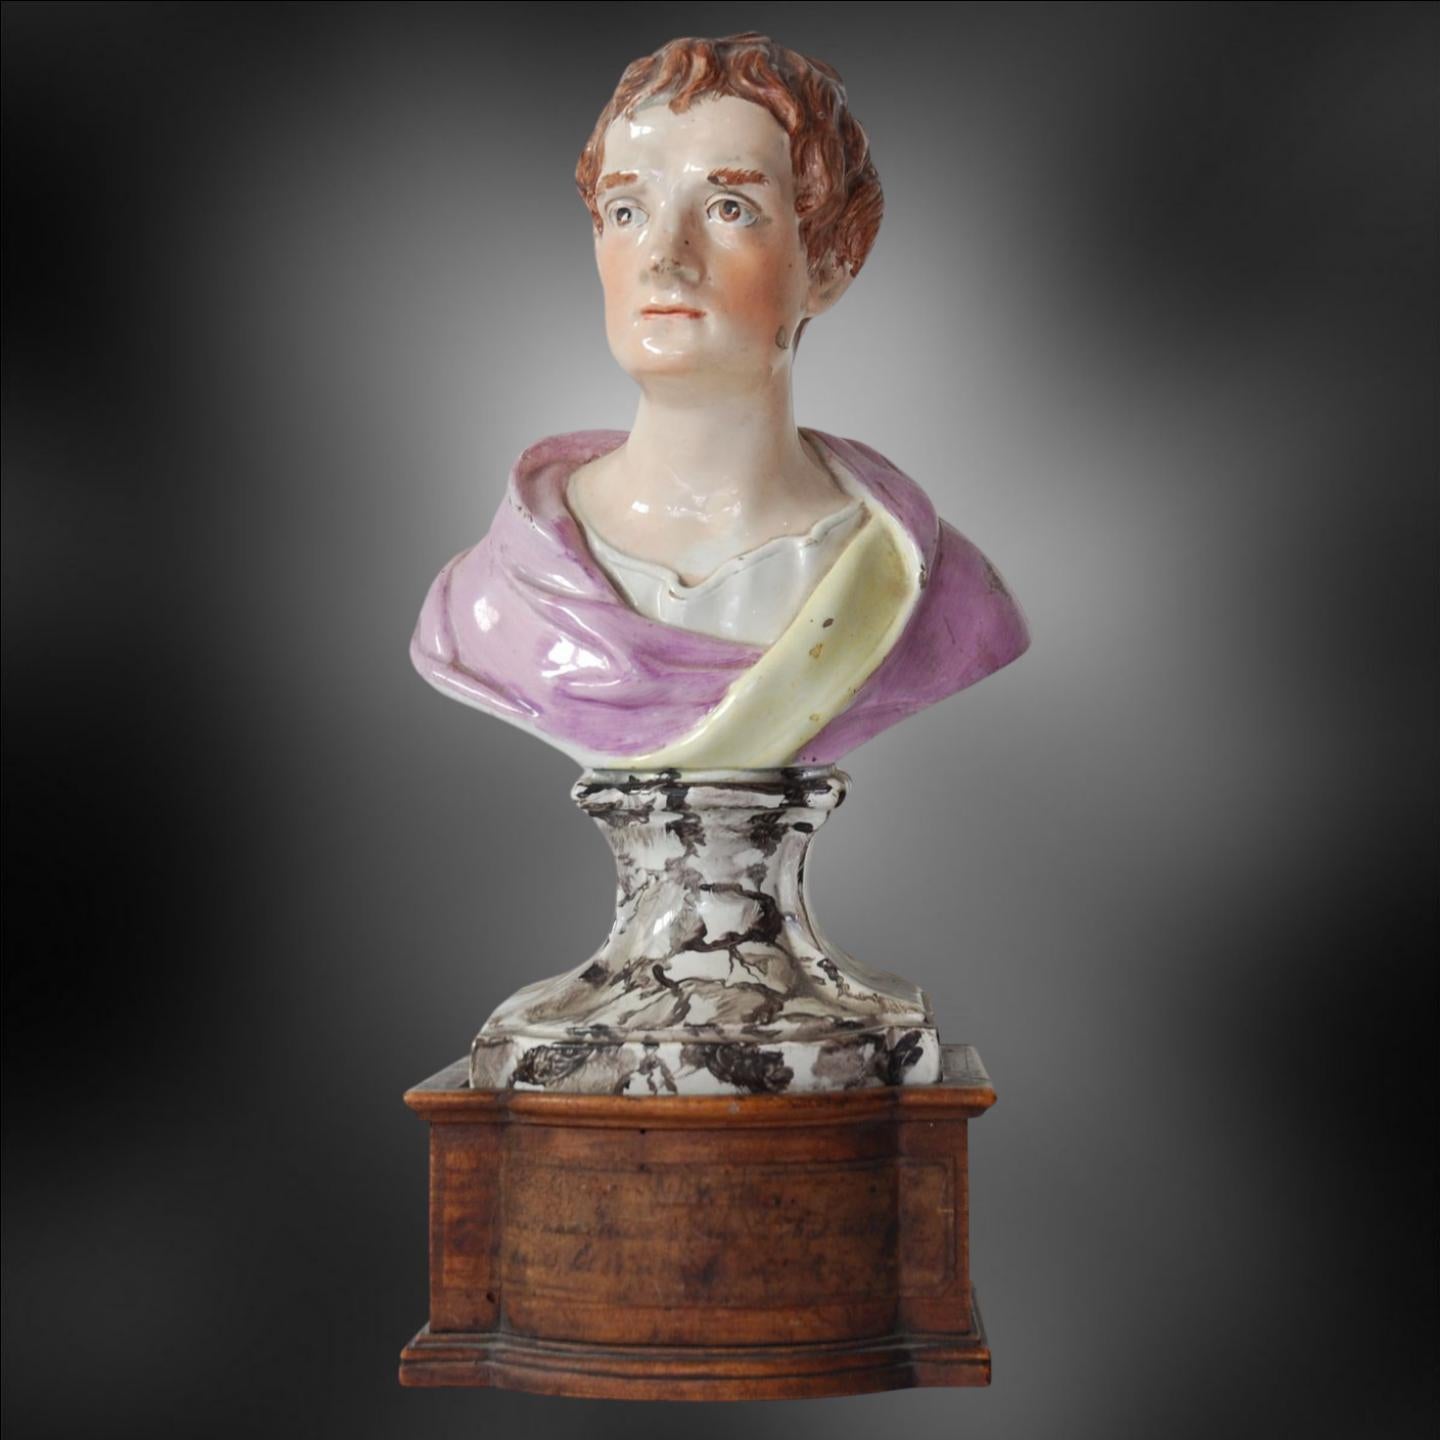 A pearlware bust of Sir Isaac Newton, by Enoch Wood. The oak pedestal adds dignity to an attractive rendering of this great man of science. A handwritten label is attached, but is unreadable, apart from the word 